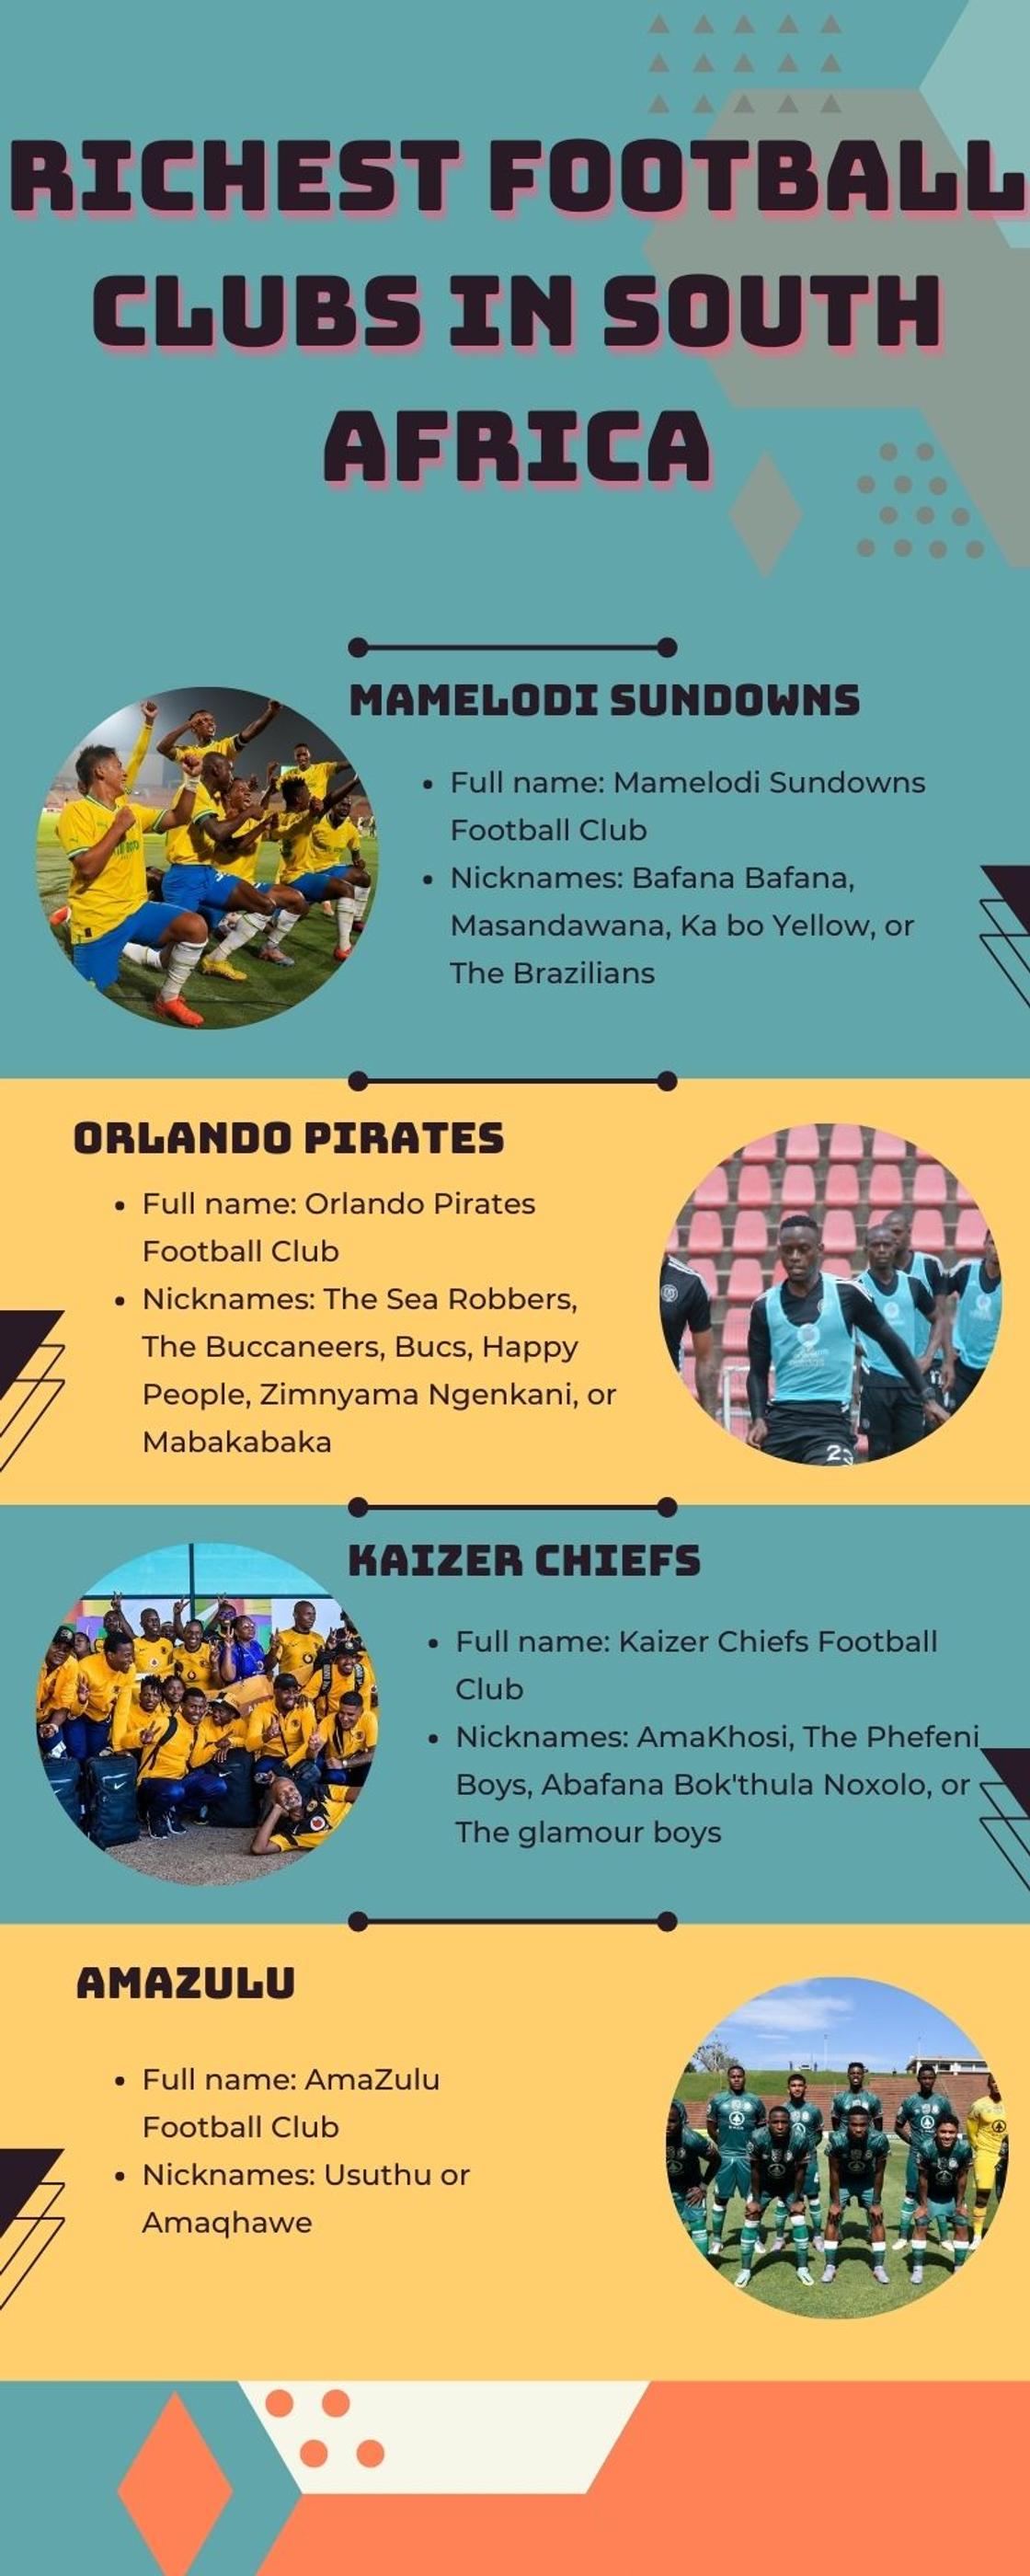 Richest football clubs in South Africa 